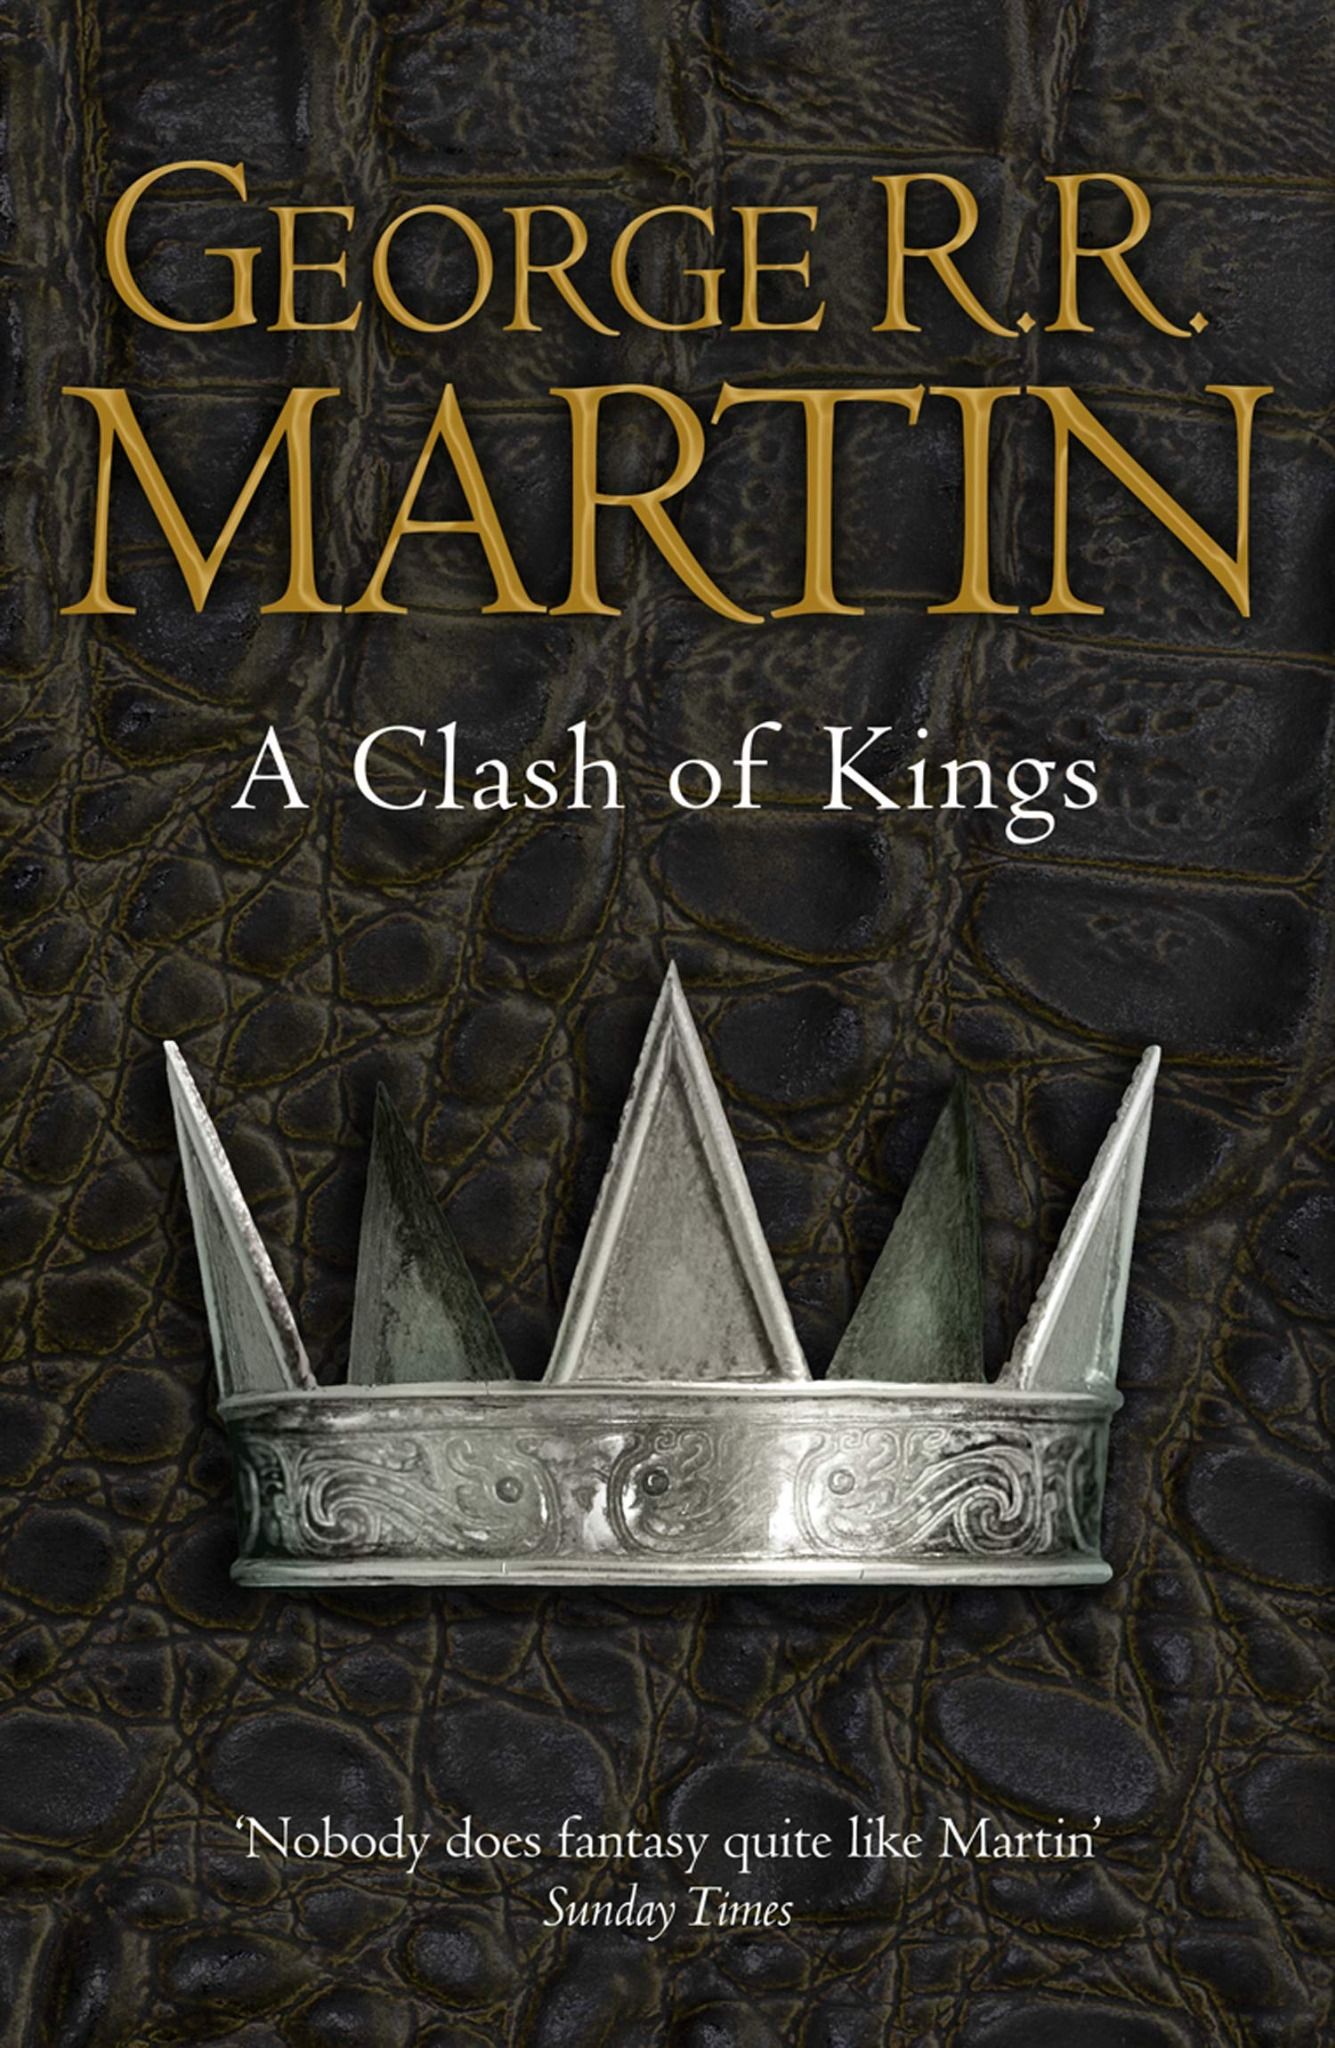 Book 2: A CLASH OF KINGS